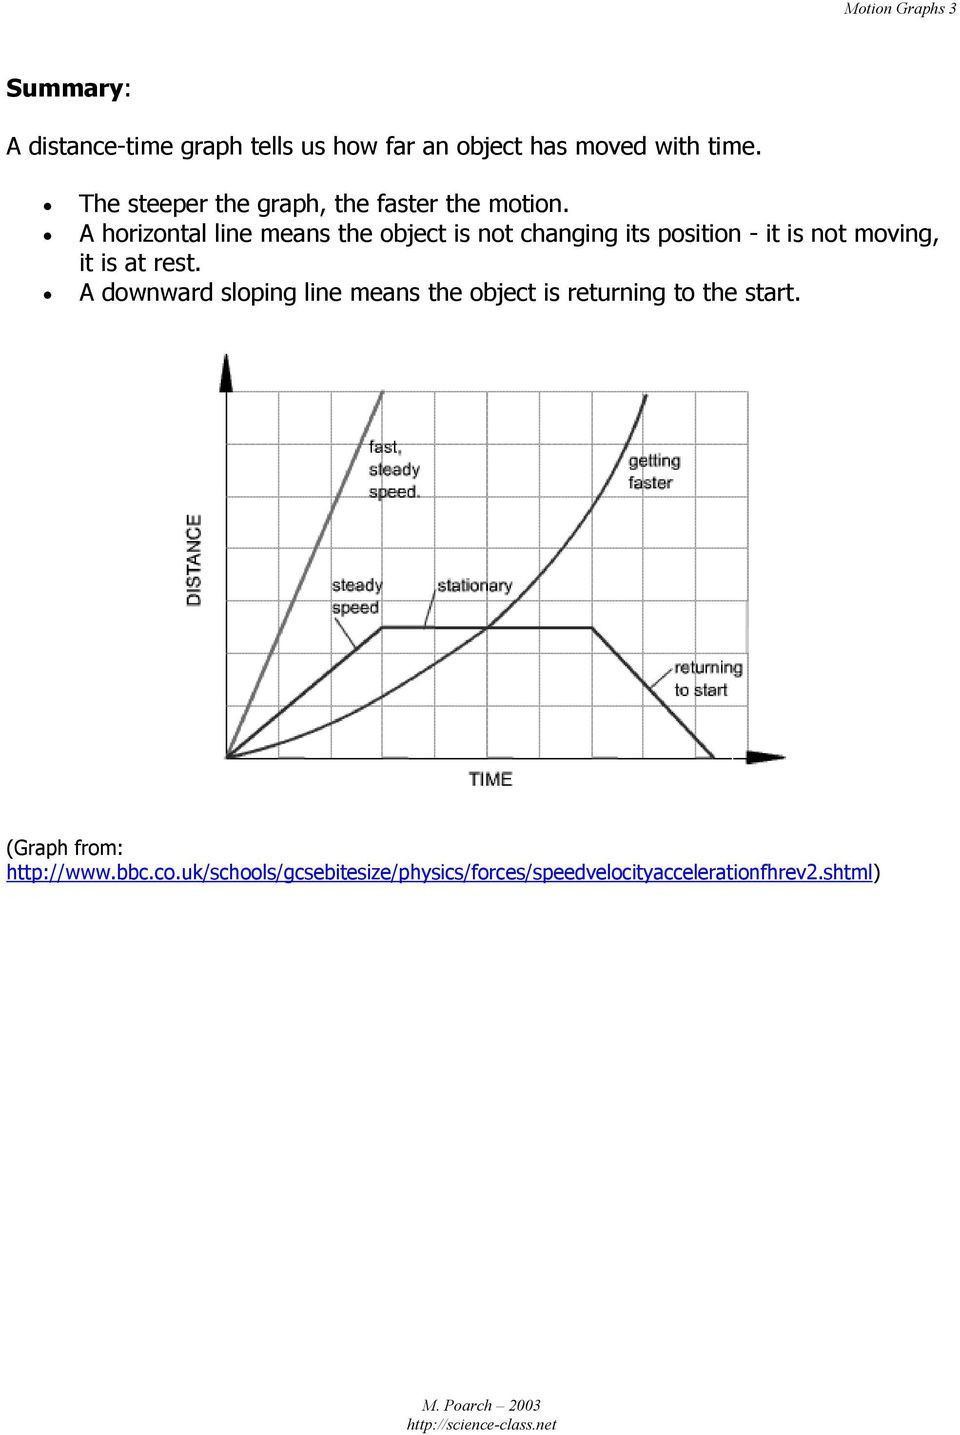 Distance Vs Time Graph Worksheet Motion Graphs Plotting Distance Against Time Can Tell You A